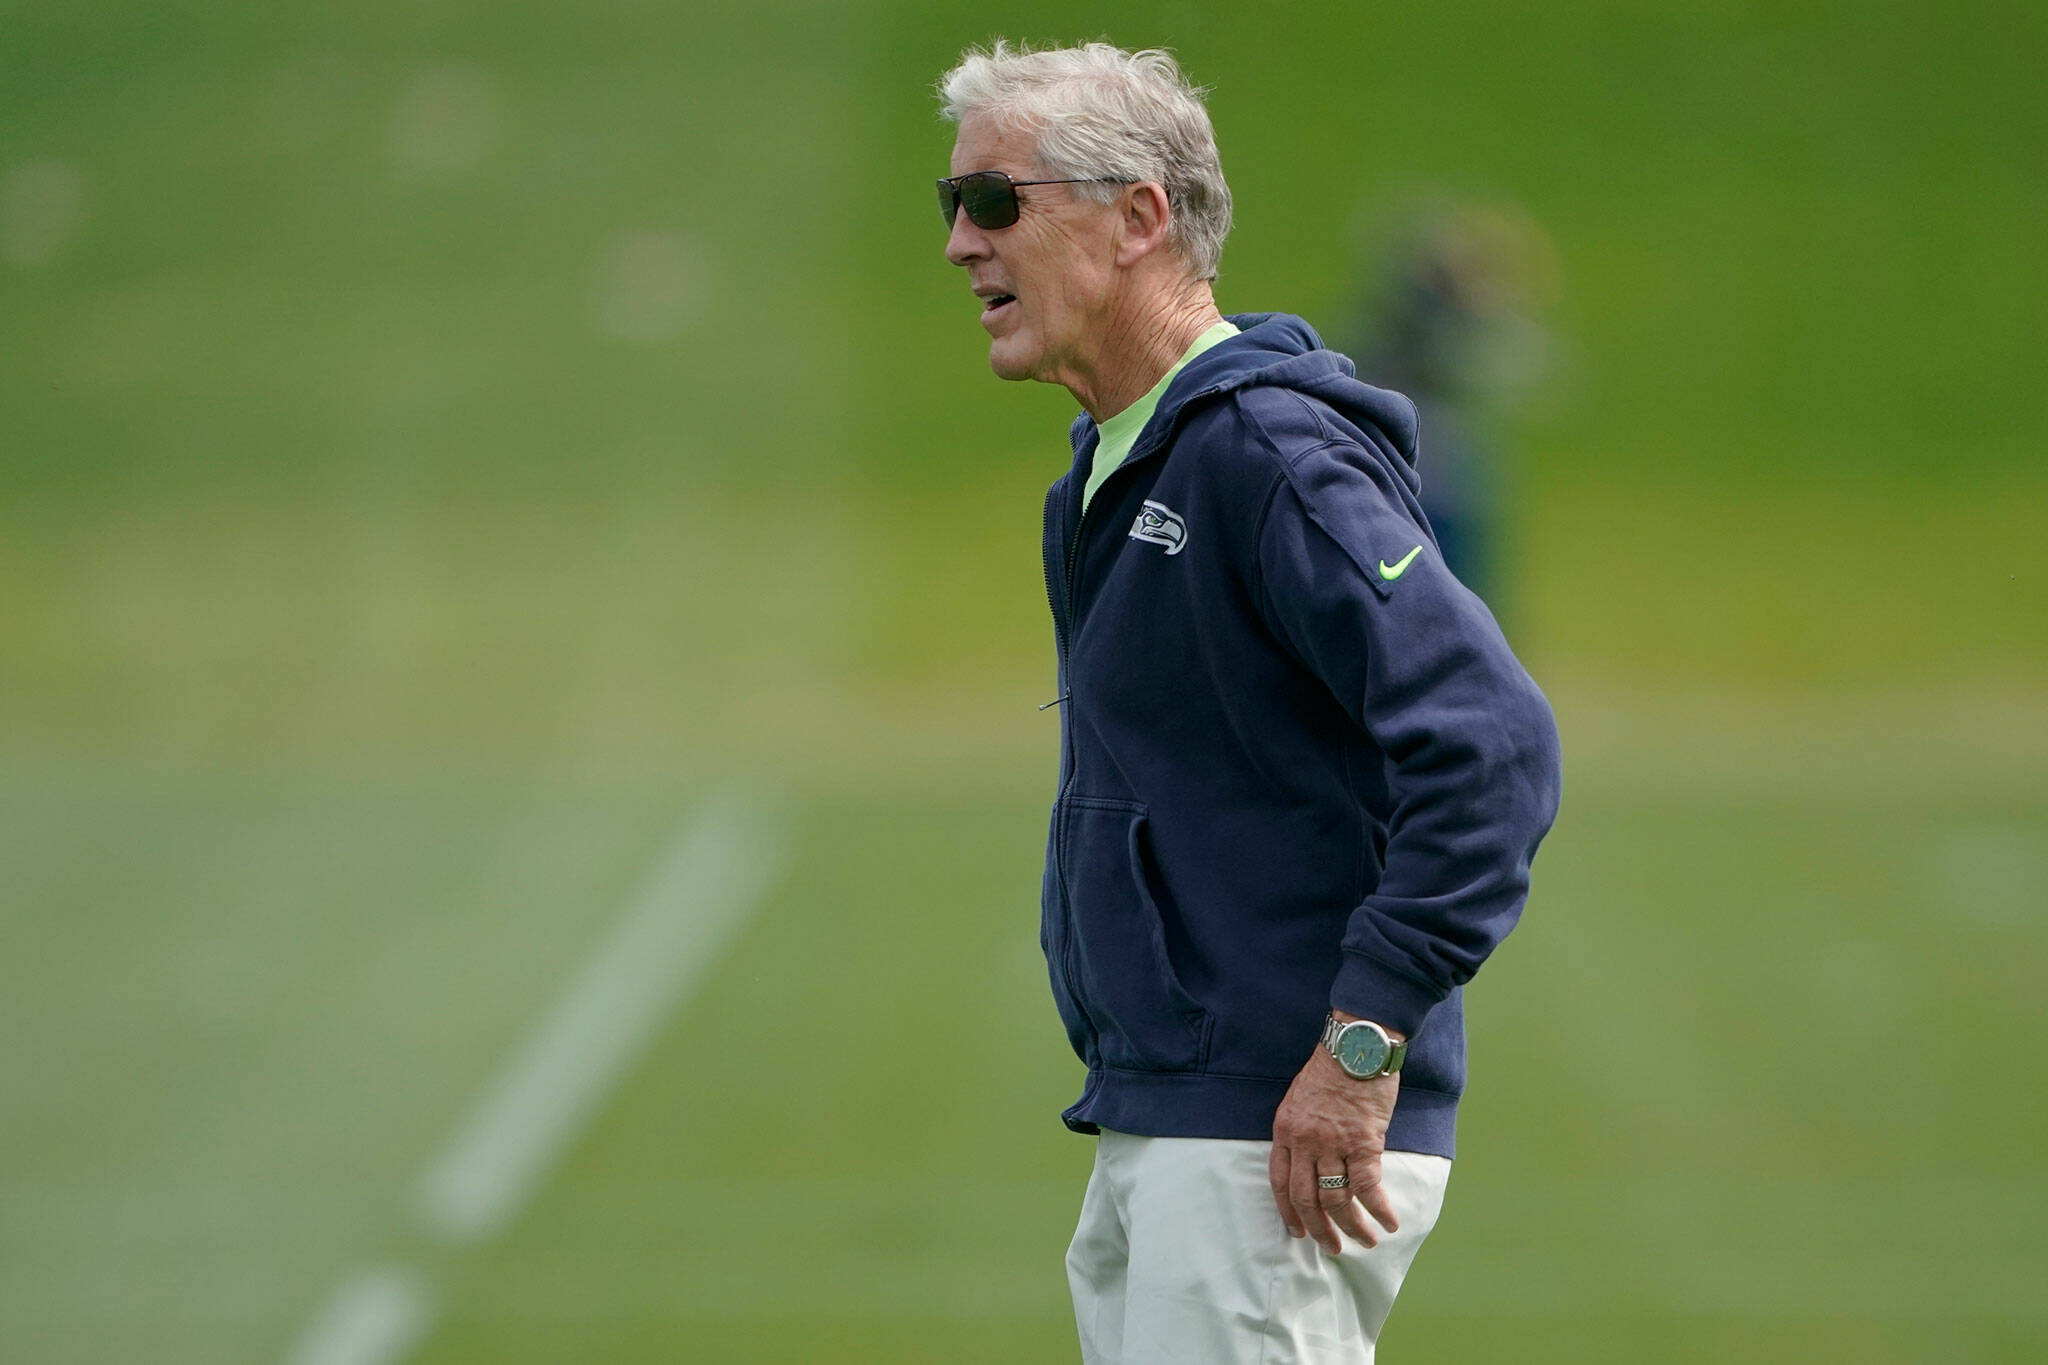 Seahawks head coach Pete Carroll watches drills during a practice on Wednesday in Renton. (AP Photo/Ted S. Warren)